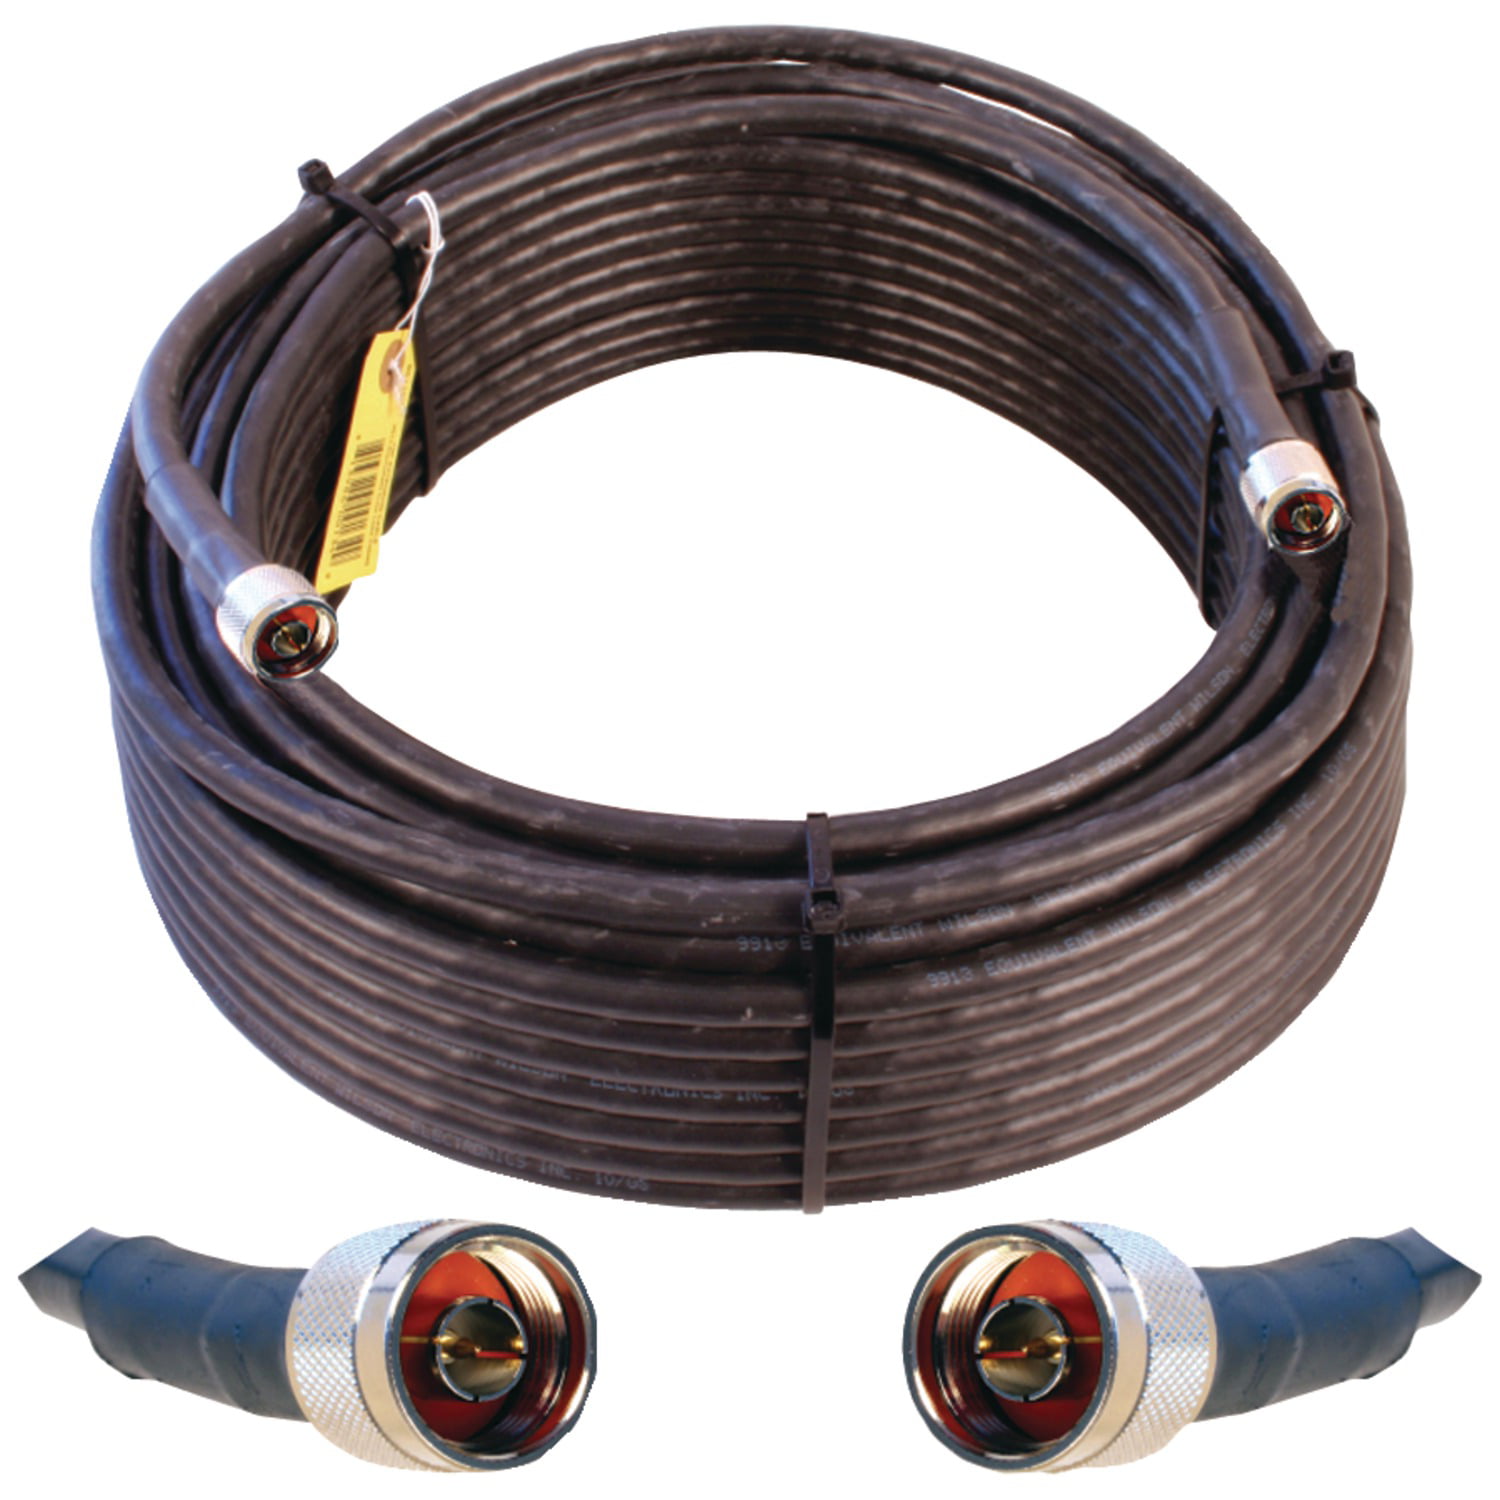 1000 ft RG58 Equiv Excellent Quality Coax Cable USA SELLER FREE SHIPPING 